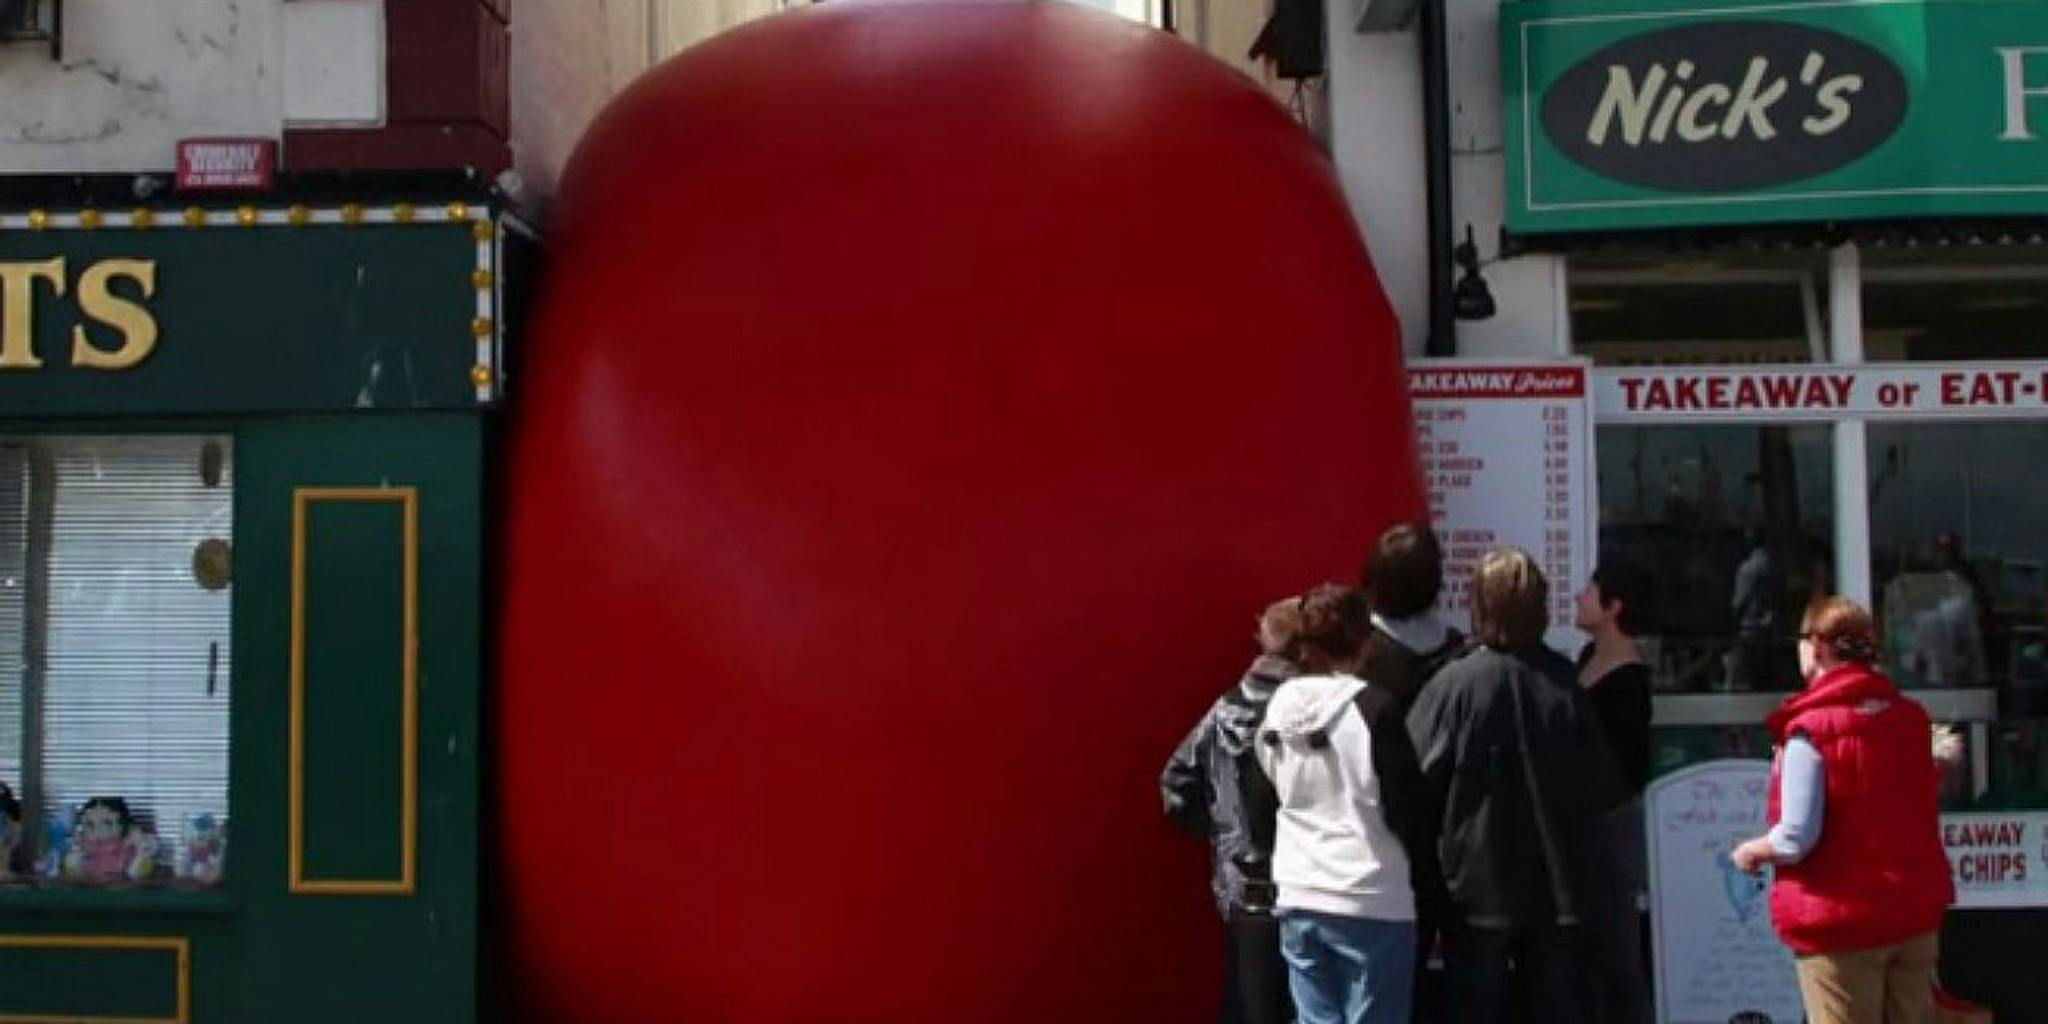 The Red Ball That Bounced Through Toledo (in 2015) Is on the Move